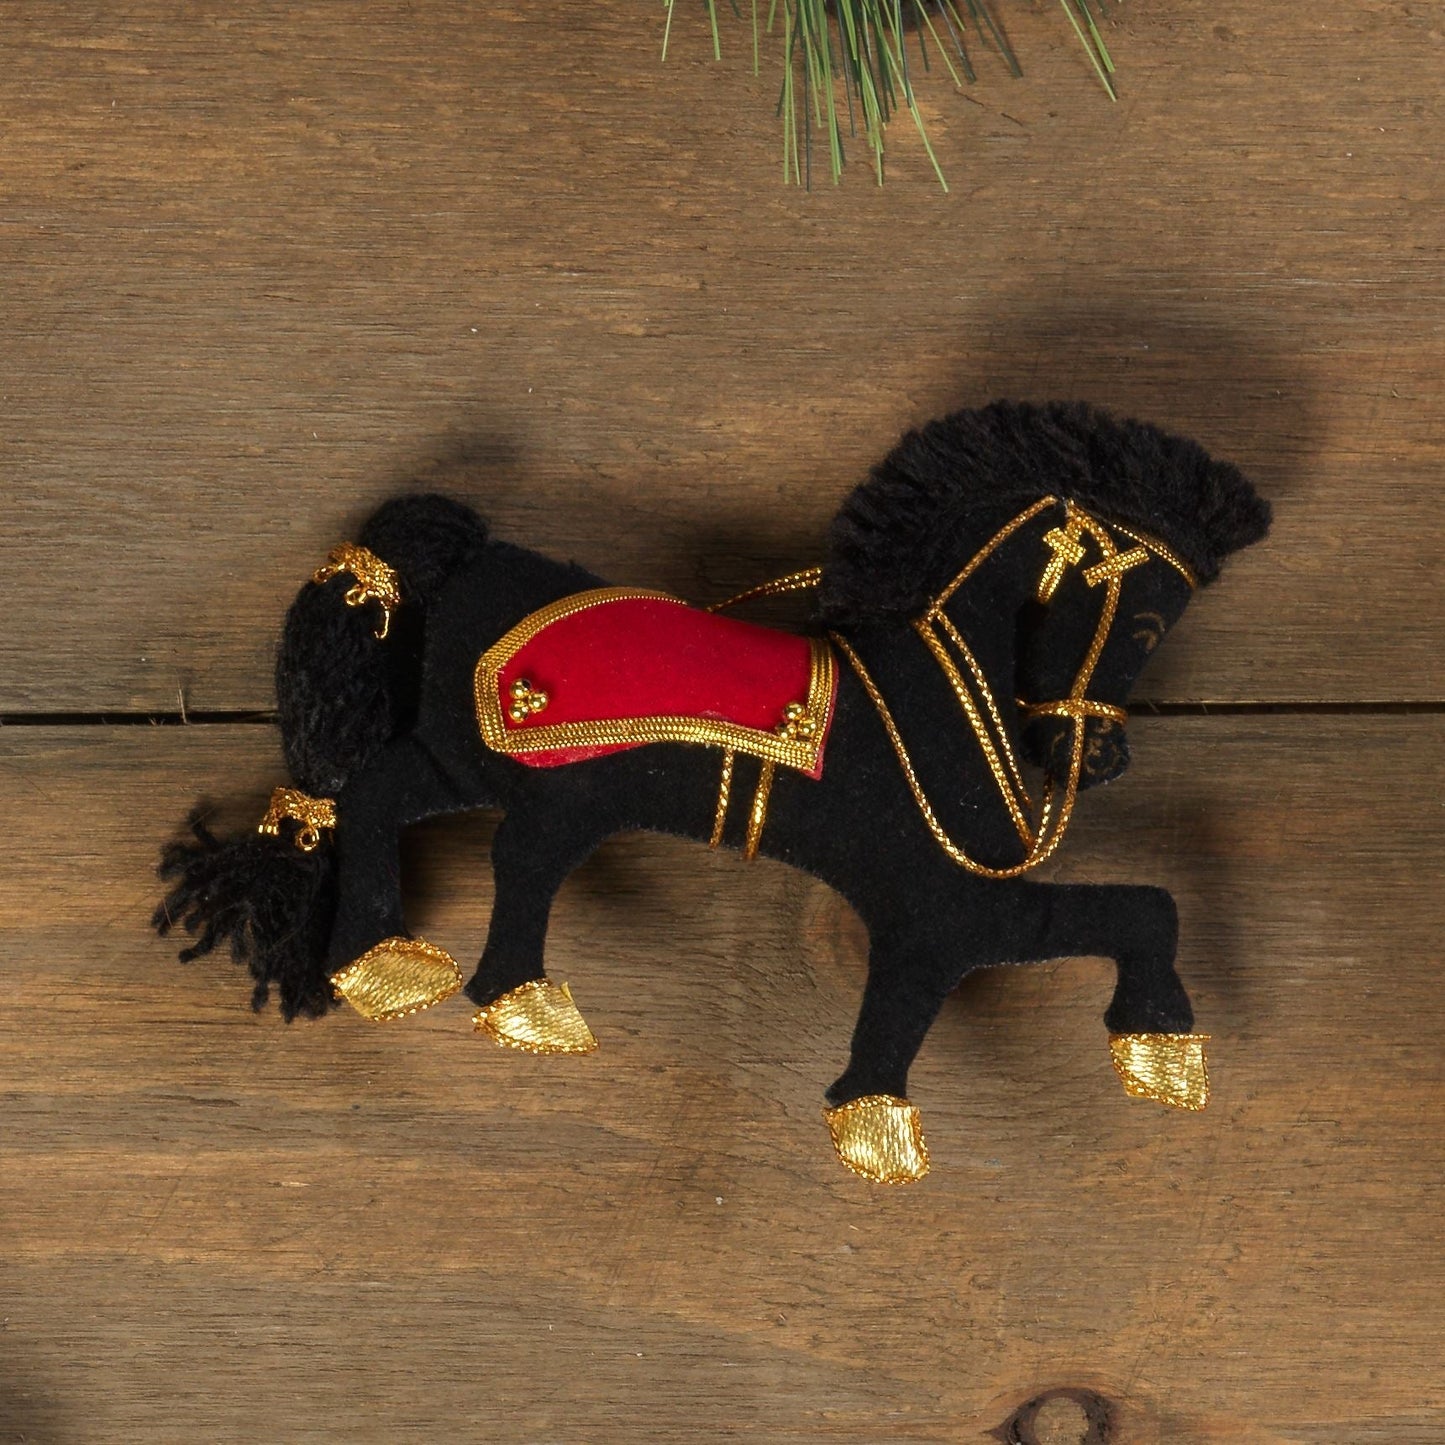 Embroidered Calvalry Horse Decoration Seasonal & Holiday Decorations ABF The Soldiers' Charity Shop 